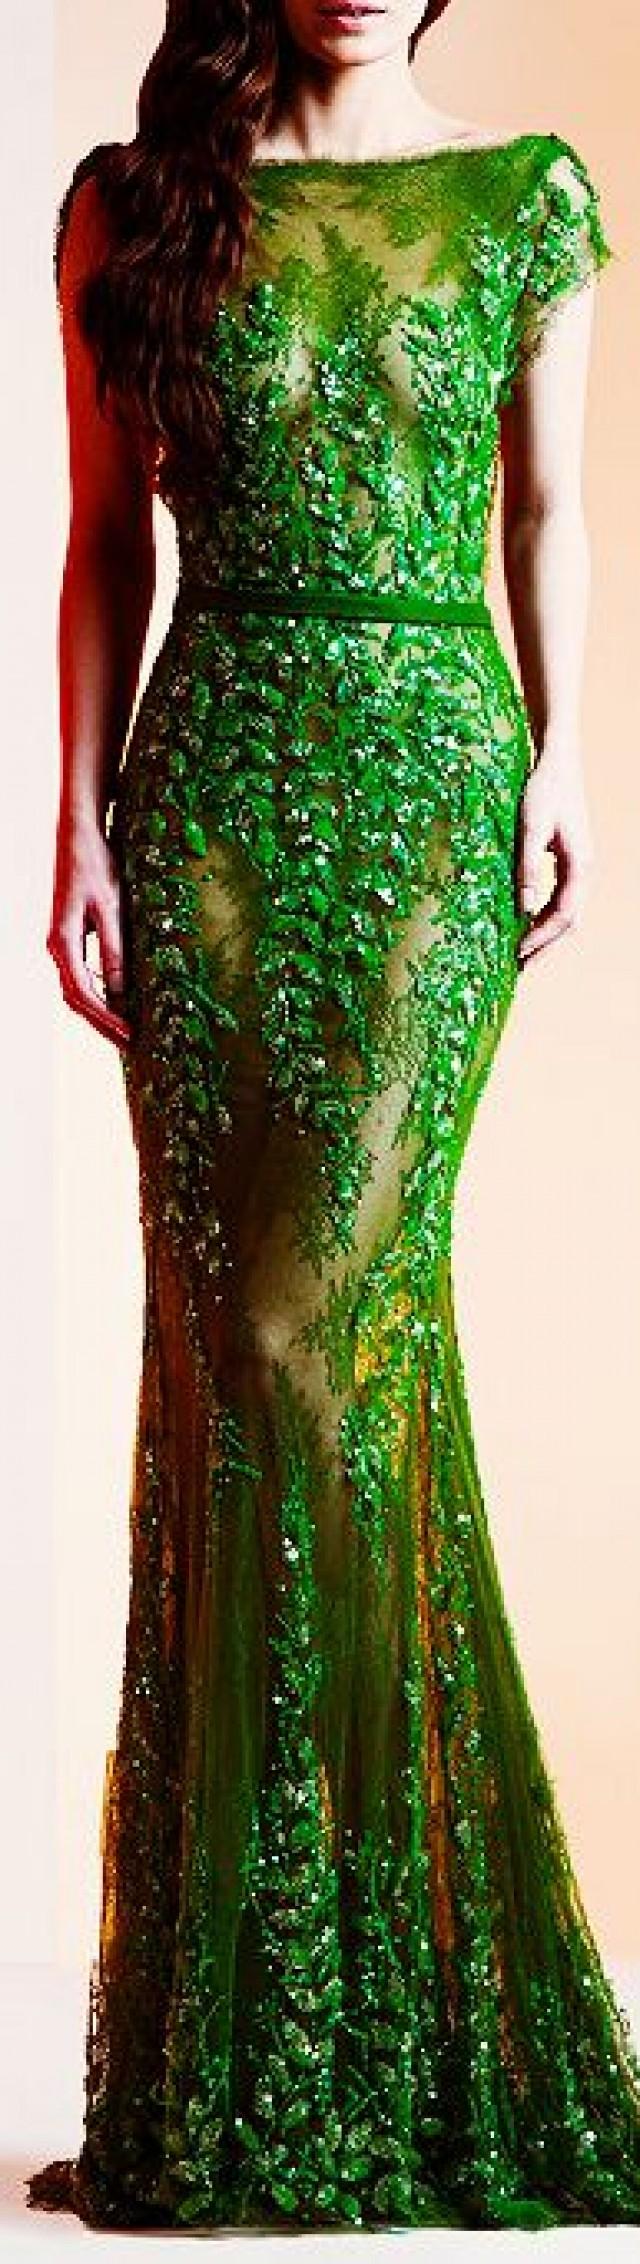 wedding photo - Gowns.....Gorgeous Greens